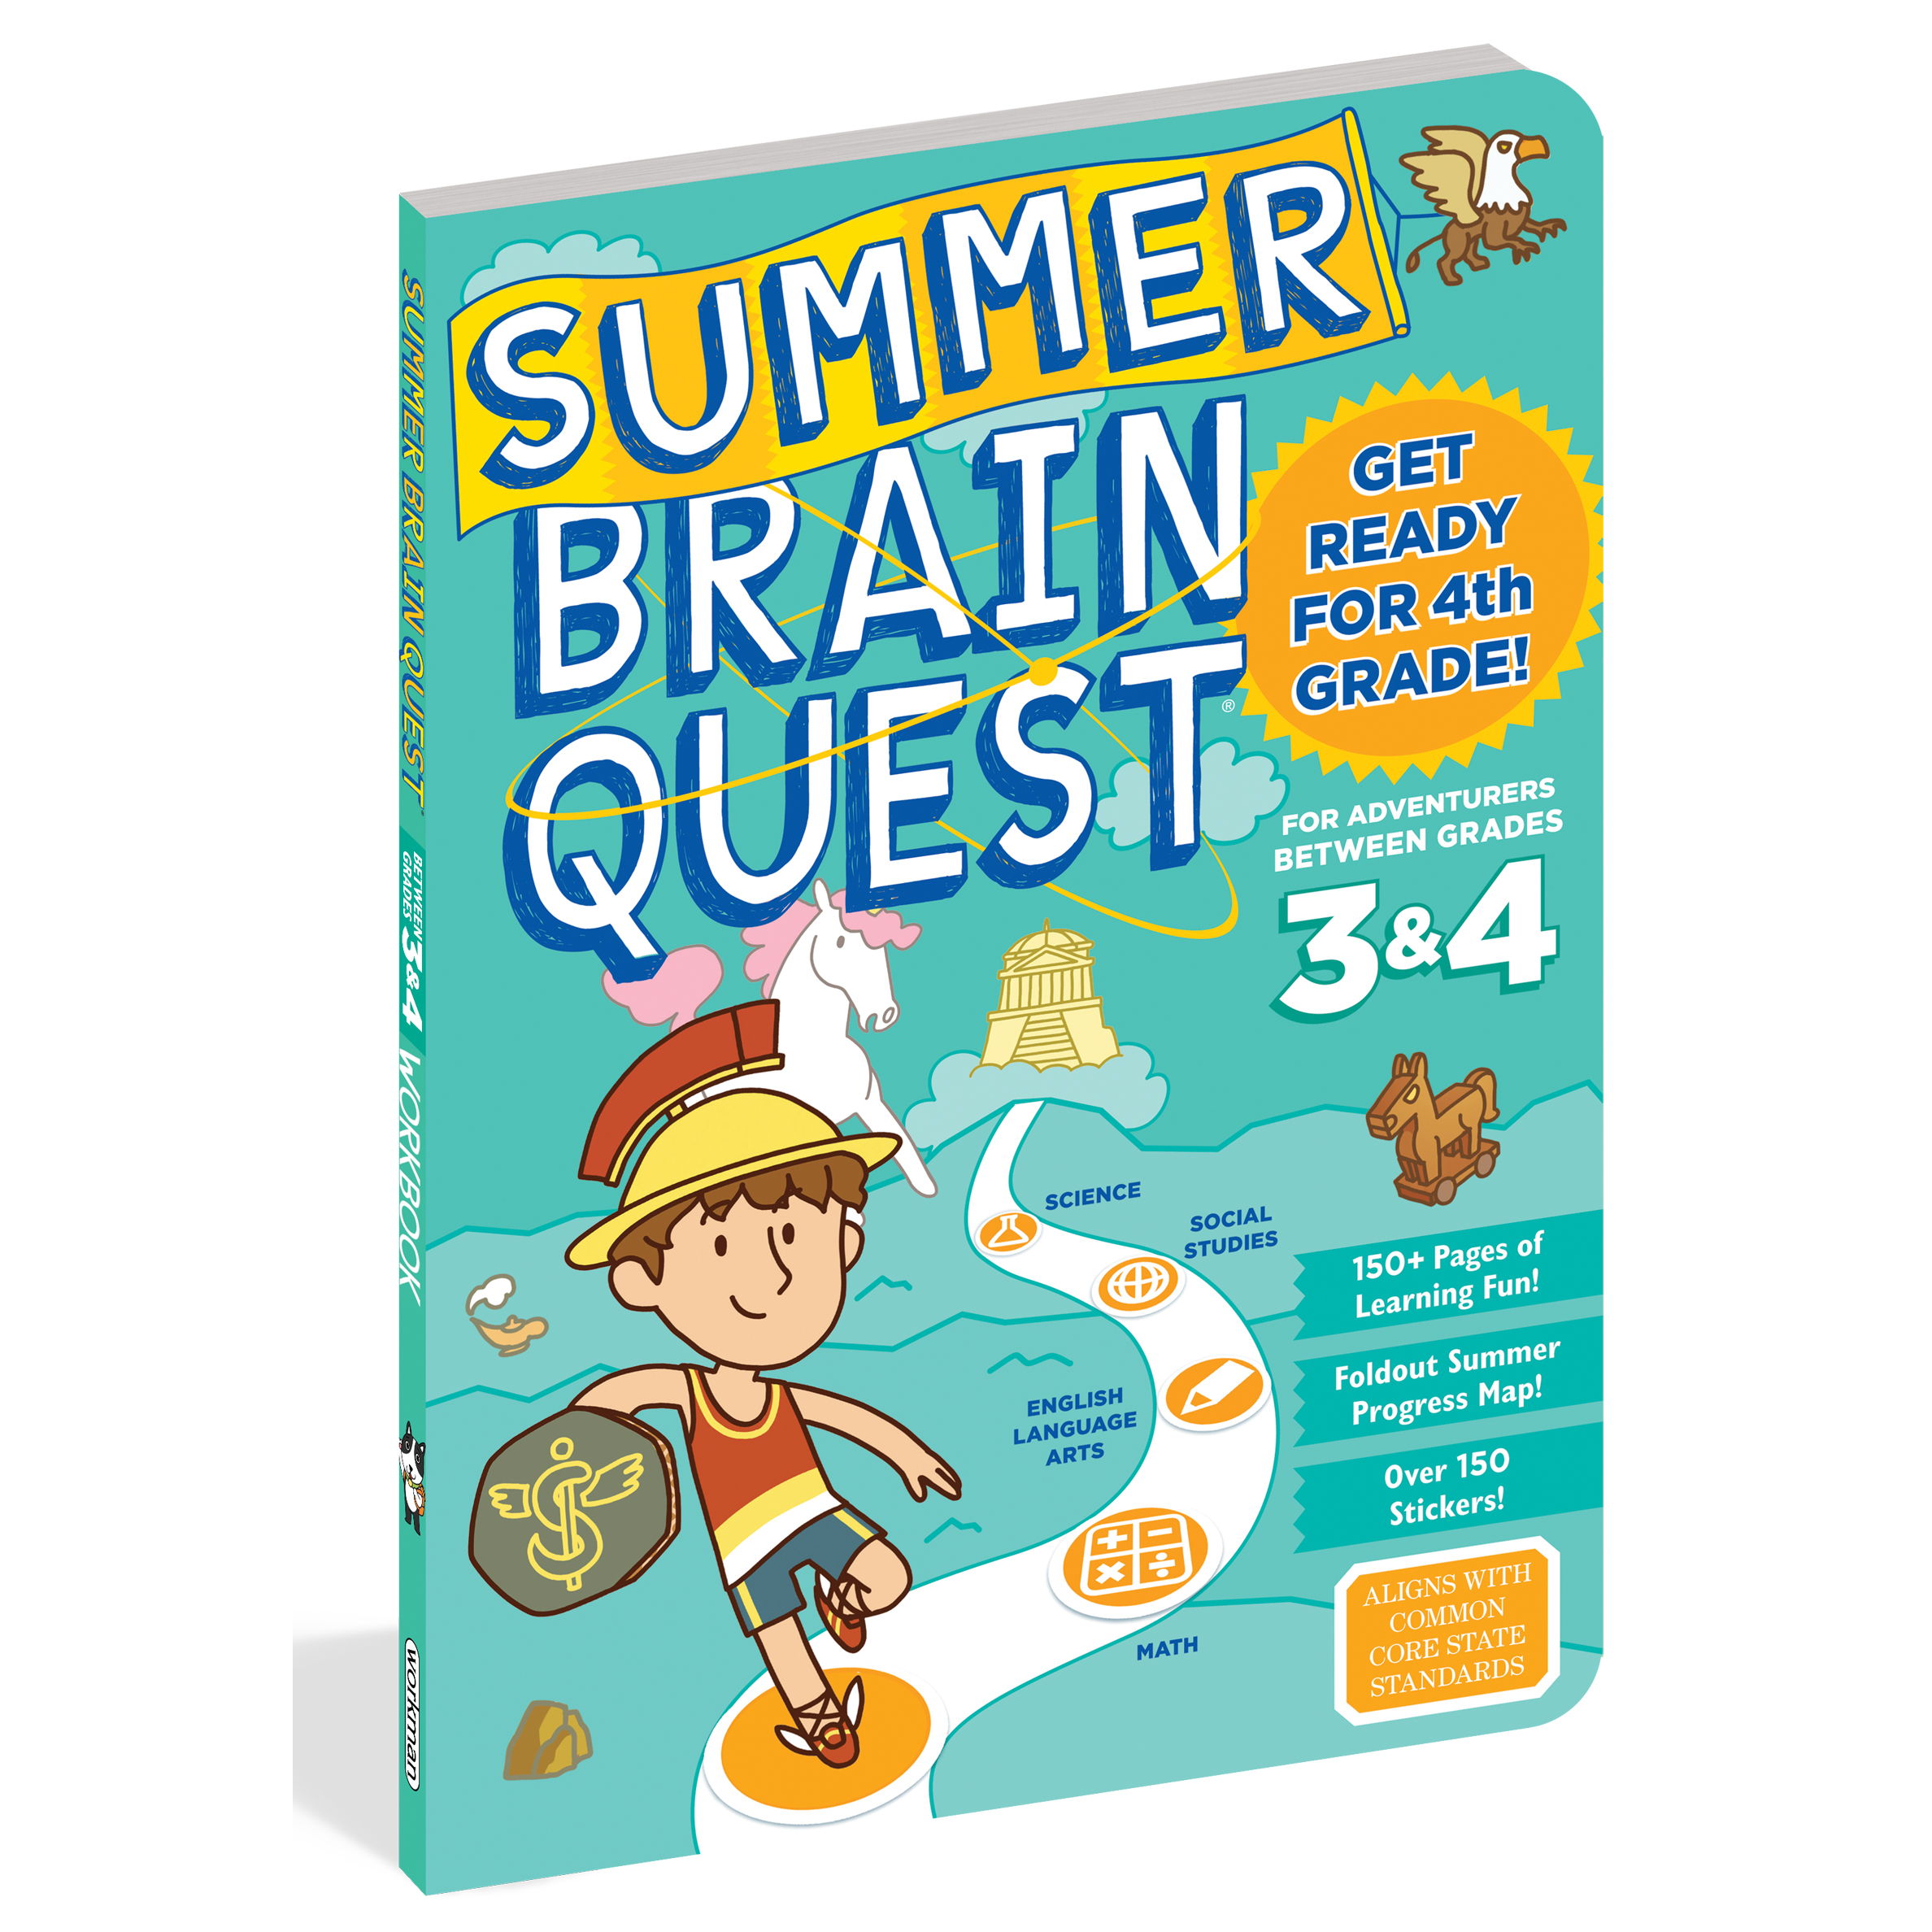 Summer Brain Quest Get ready for 4th Grade! 1